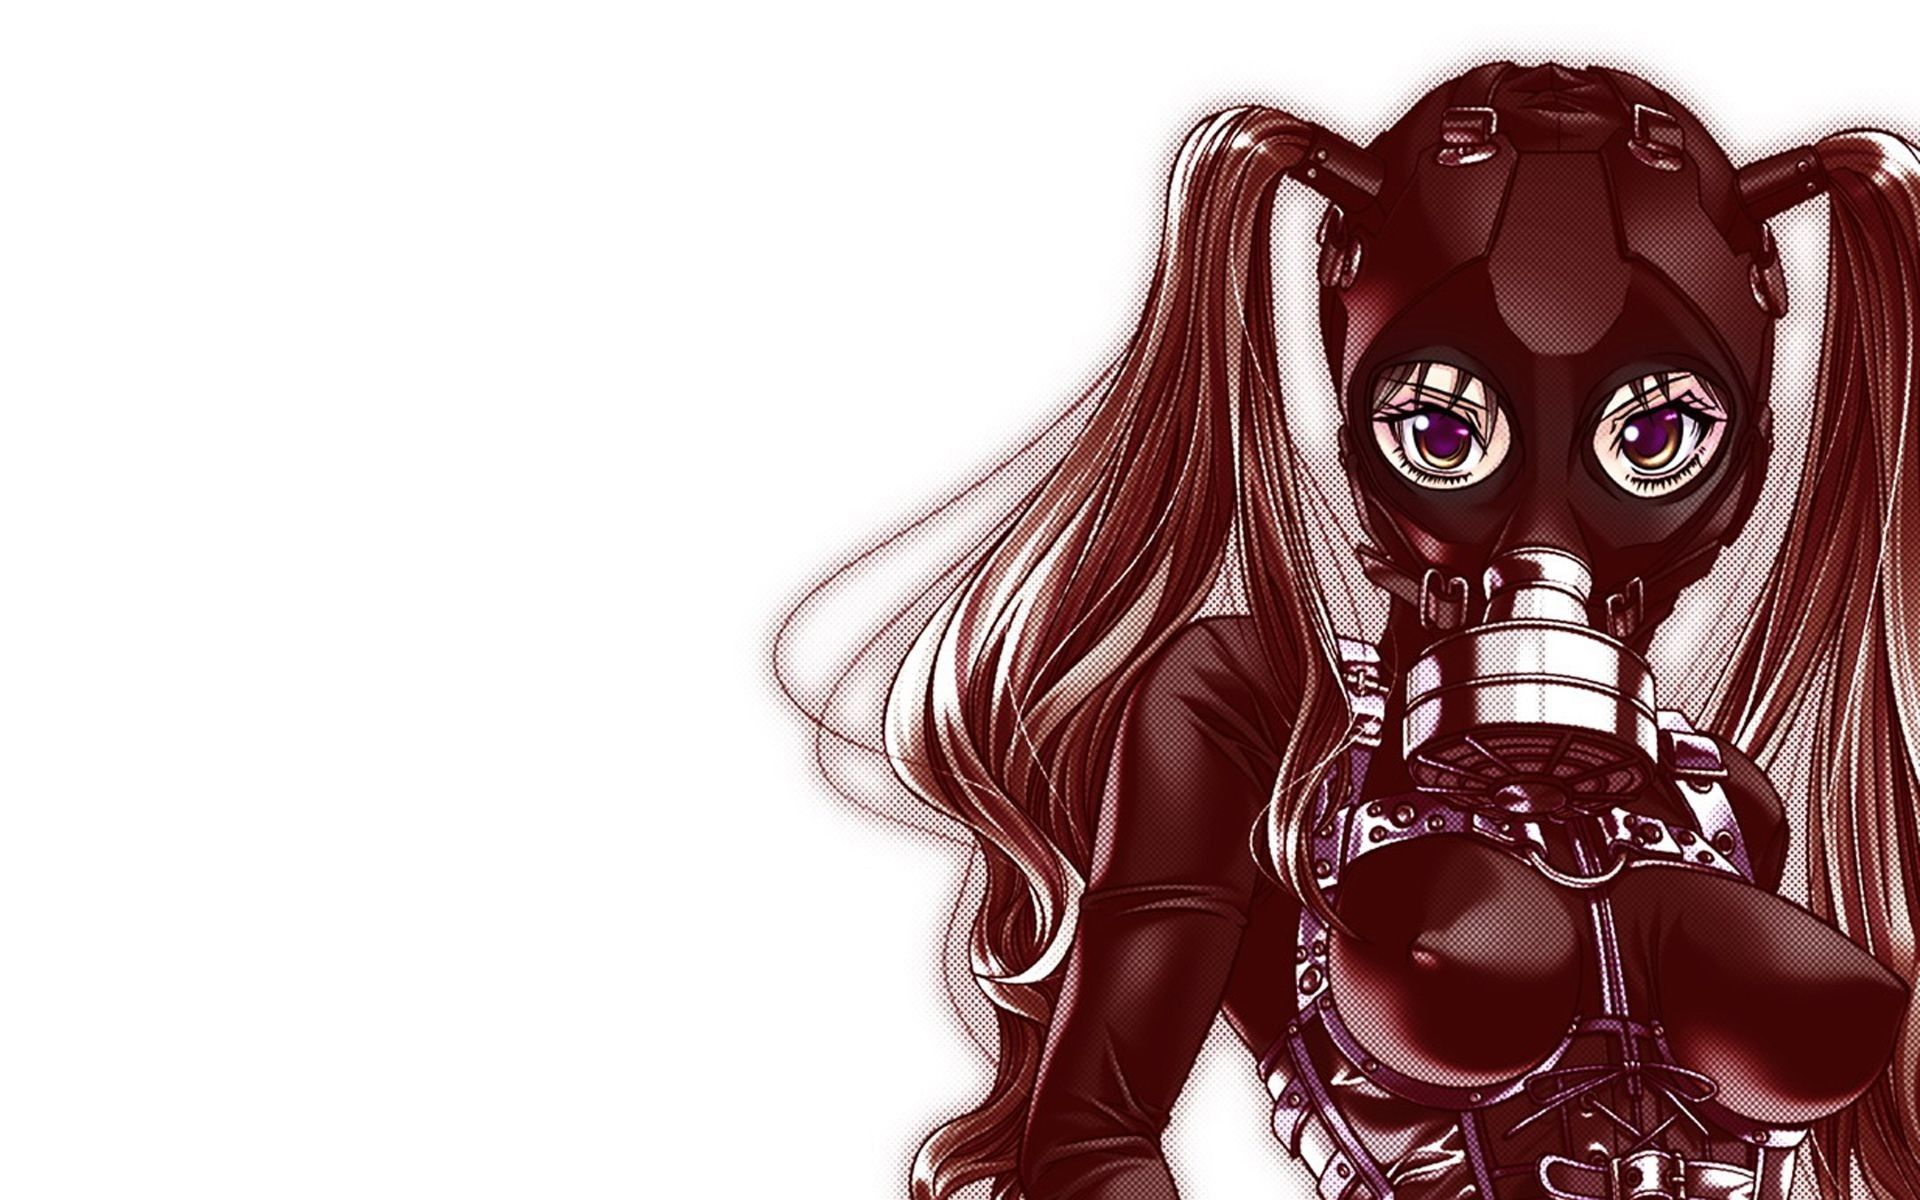 Female With Gas Mask Anime Wallpapers Wallpaper Cave